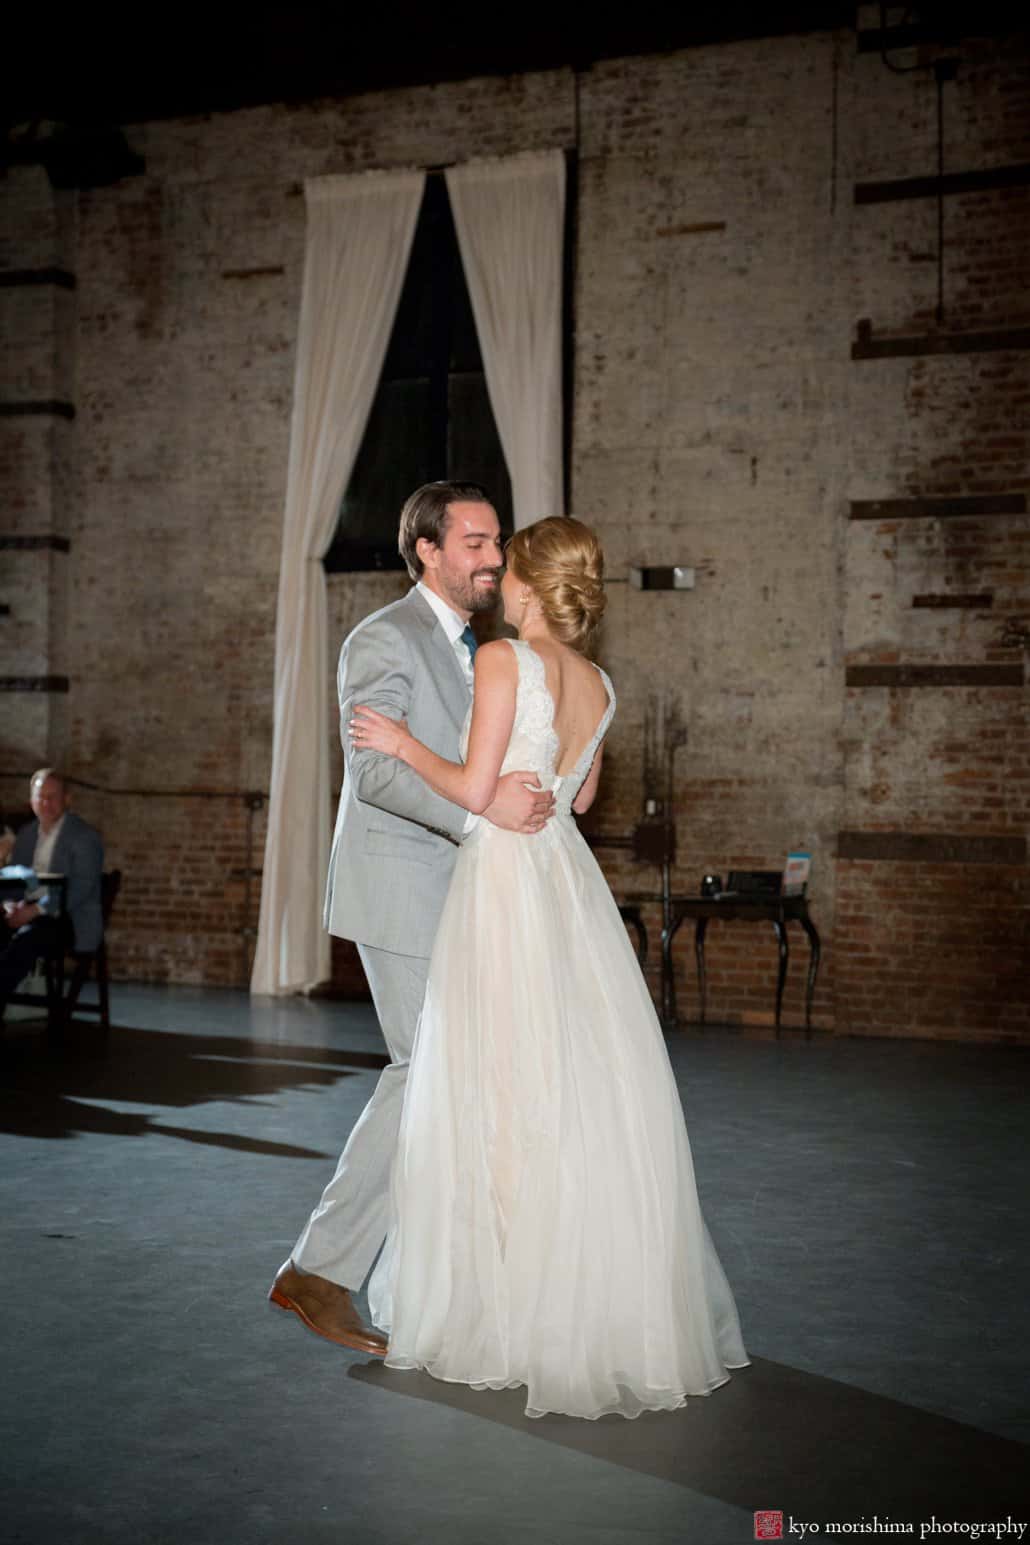 Bride (wearing Shareen Bridal gown) and groom begin their first dance at industrial-style wedding in the Green Building, Brooklyn, photographed by Kyo Morishima